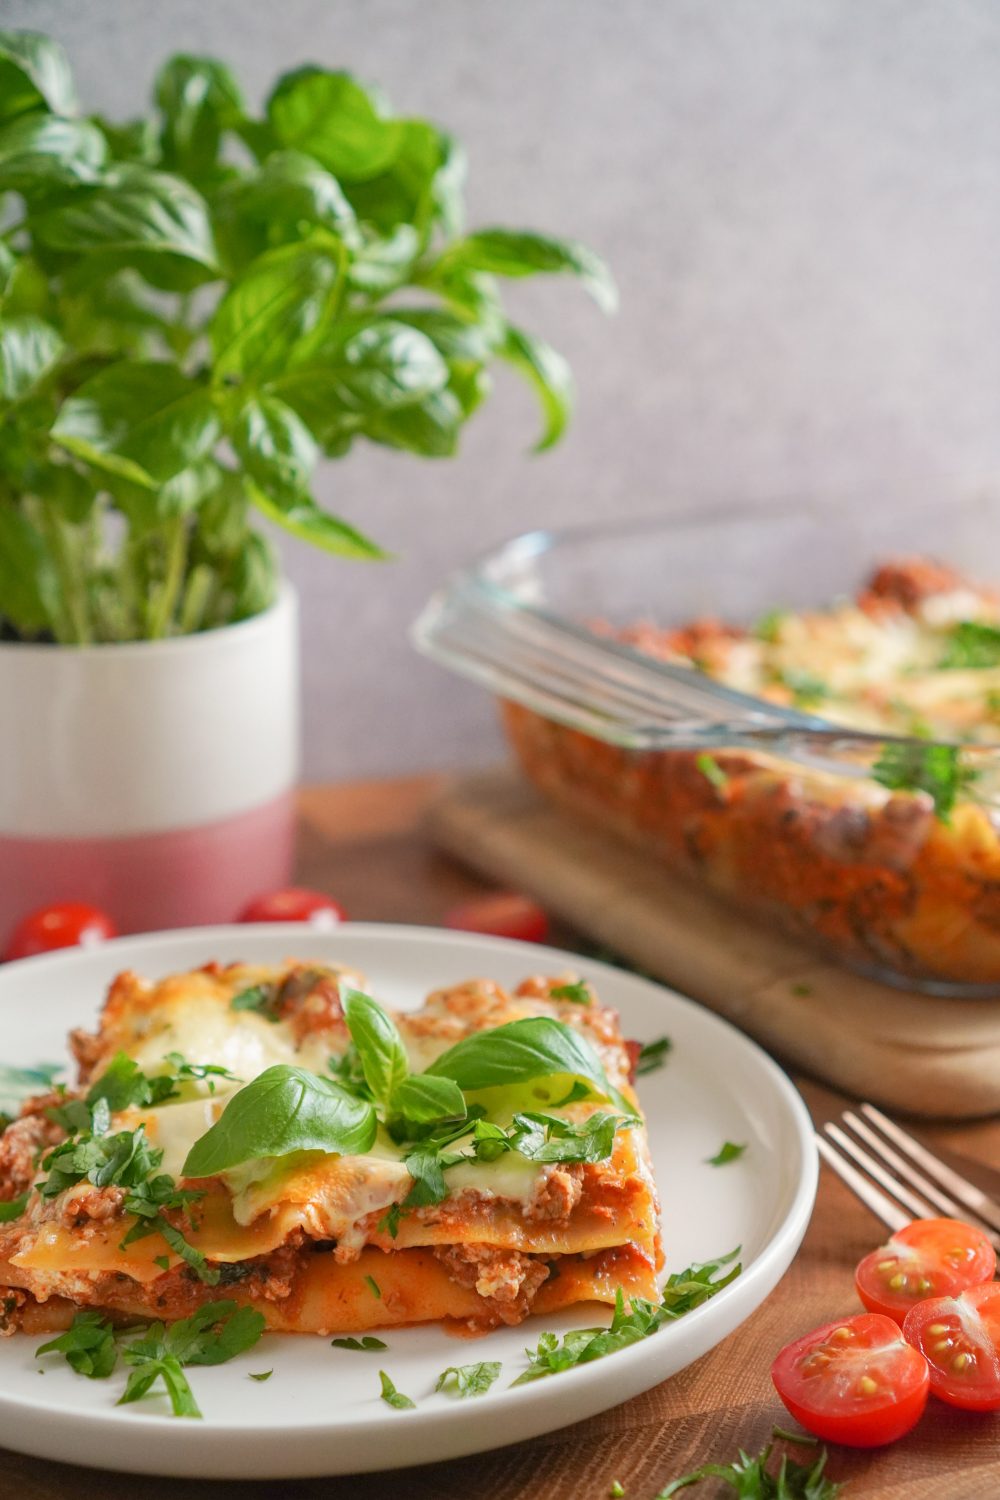 Lasagne with ricotta cheese substitute